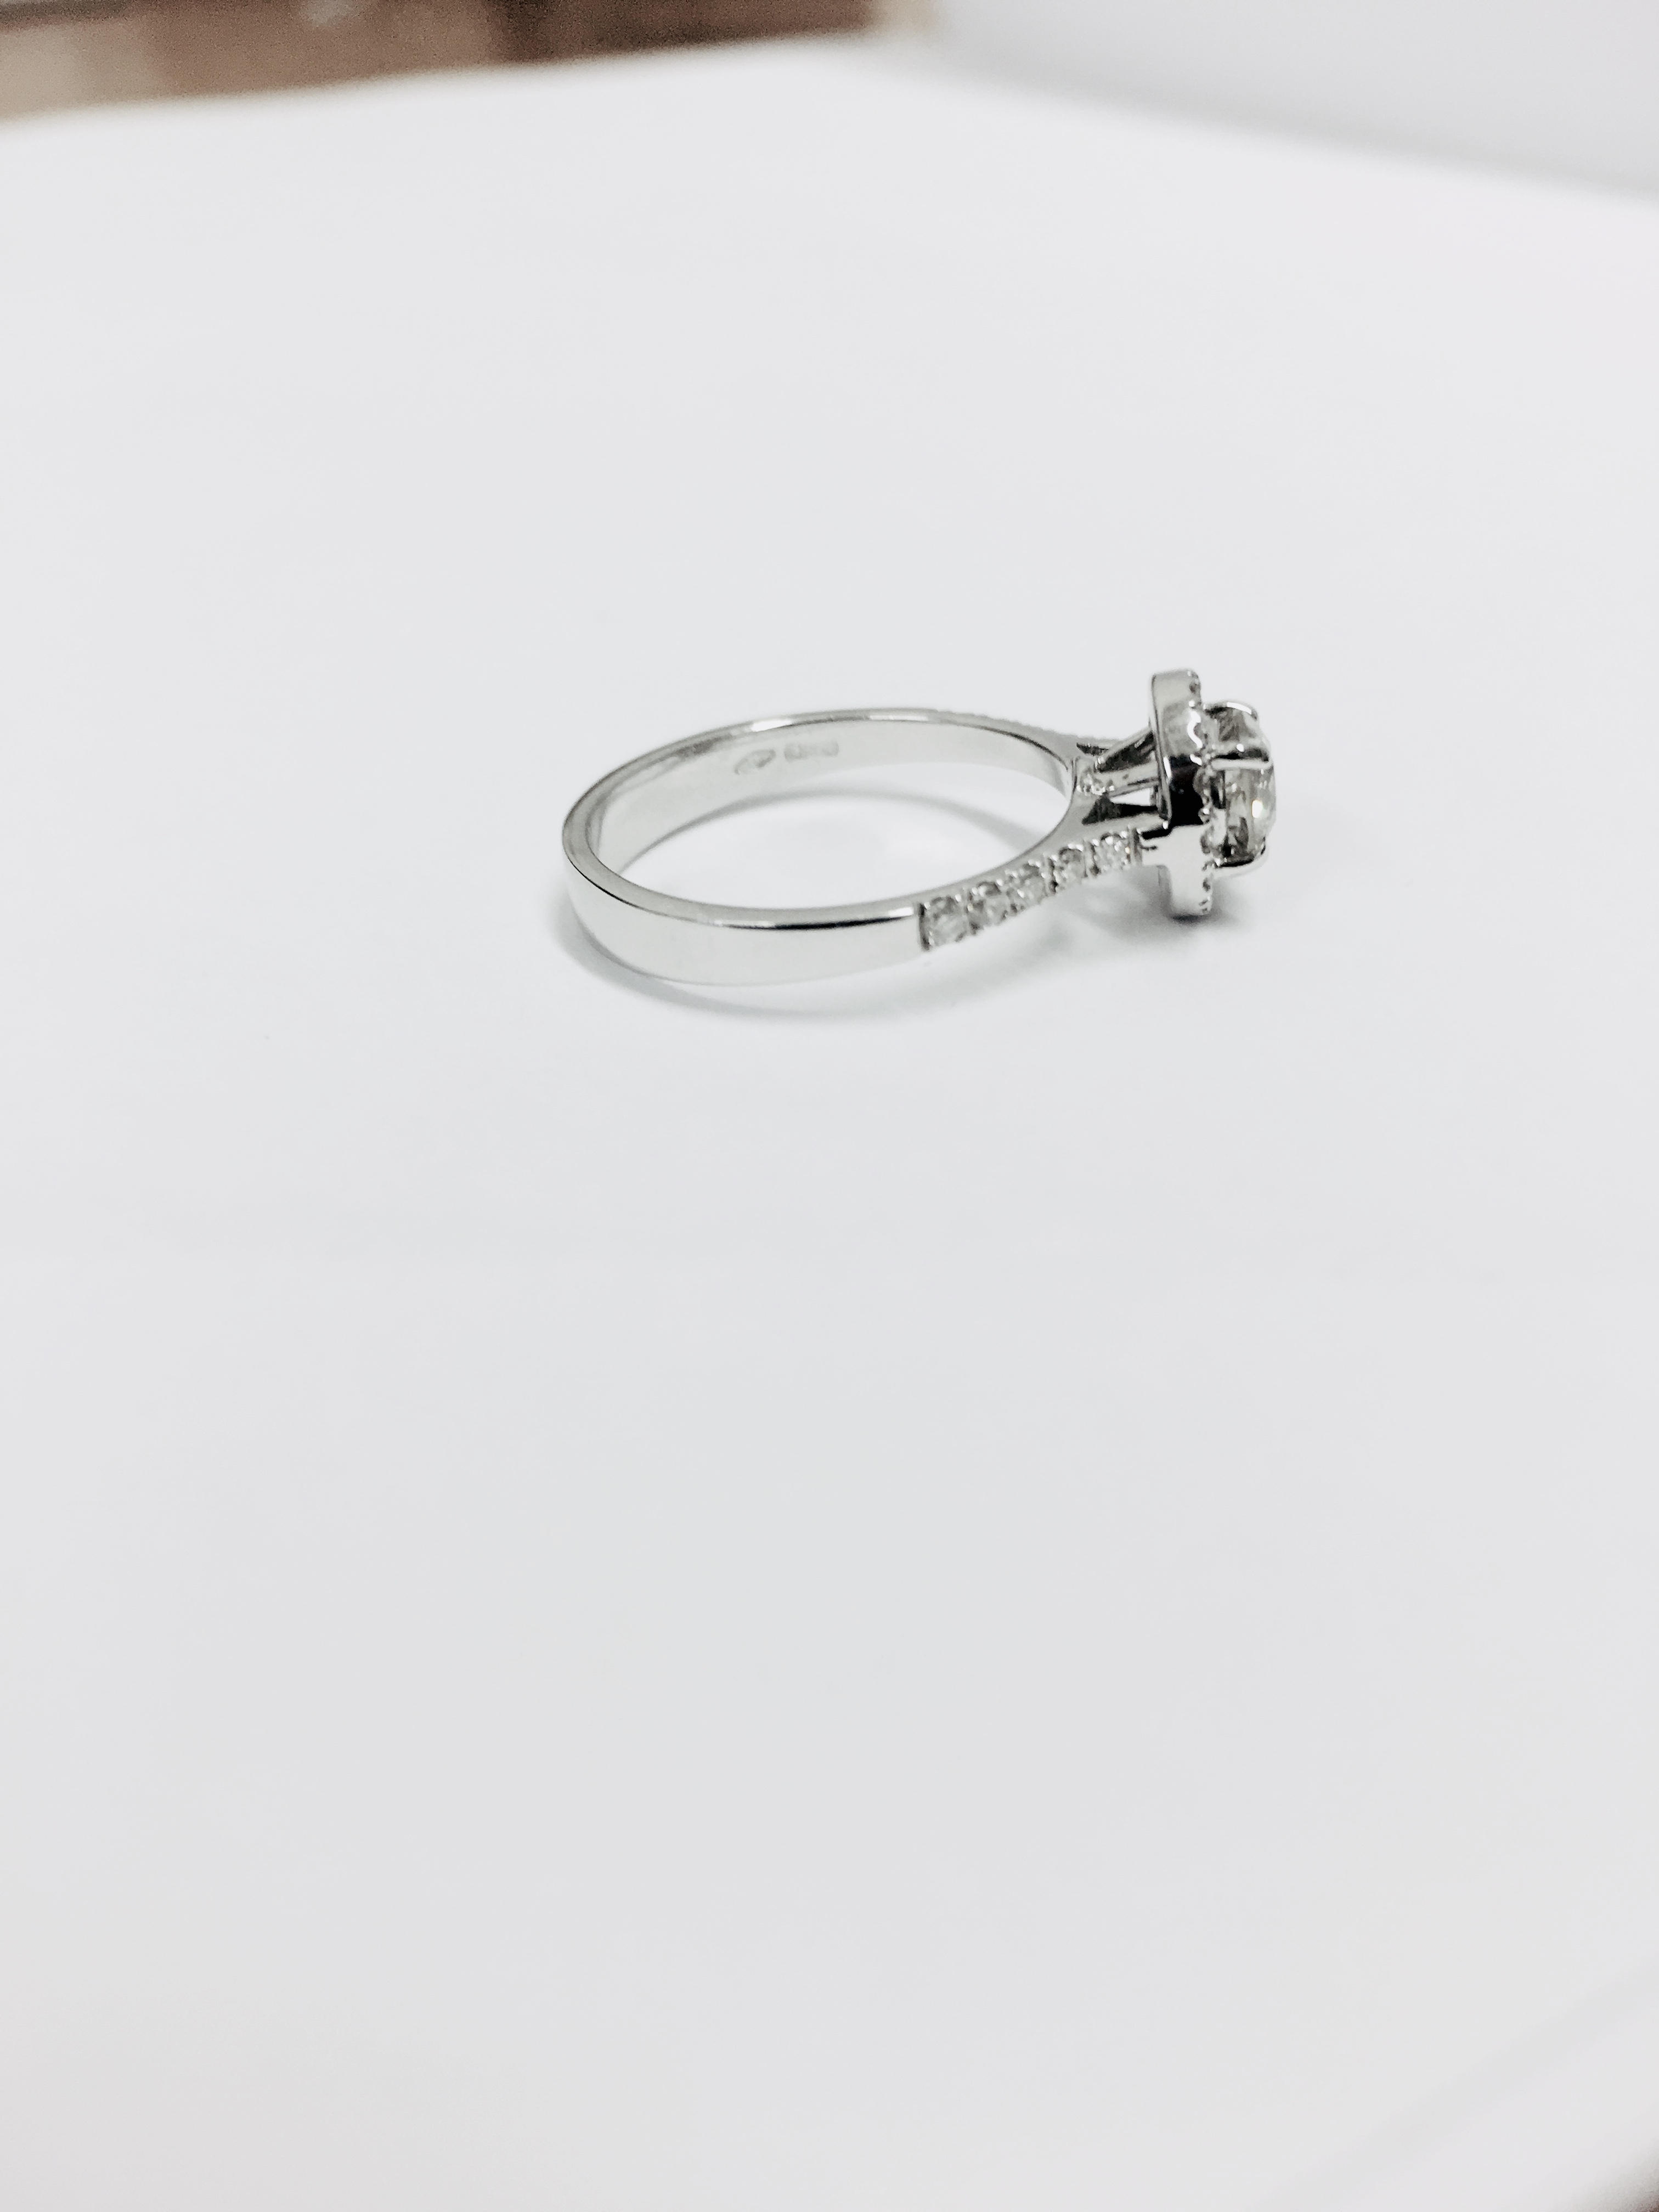 0.40ct diamond set solitaire ring set in 18ct gold. Centre stone J colour, si3 clarity with a halo - Image 4 of 6